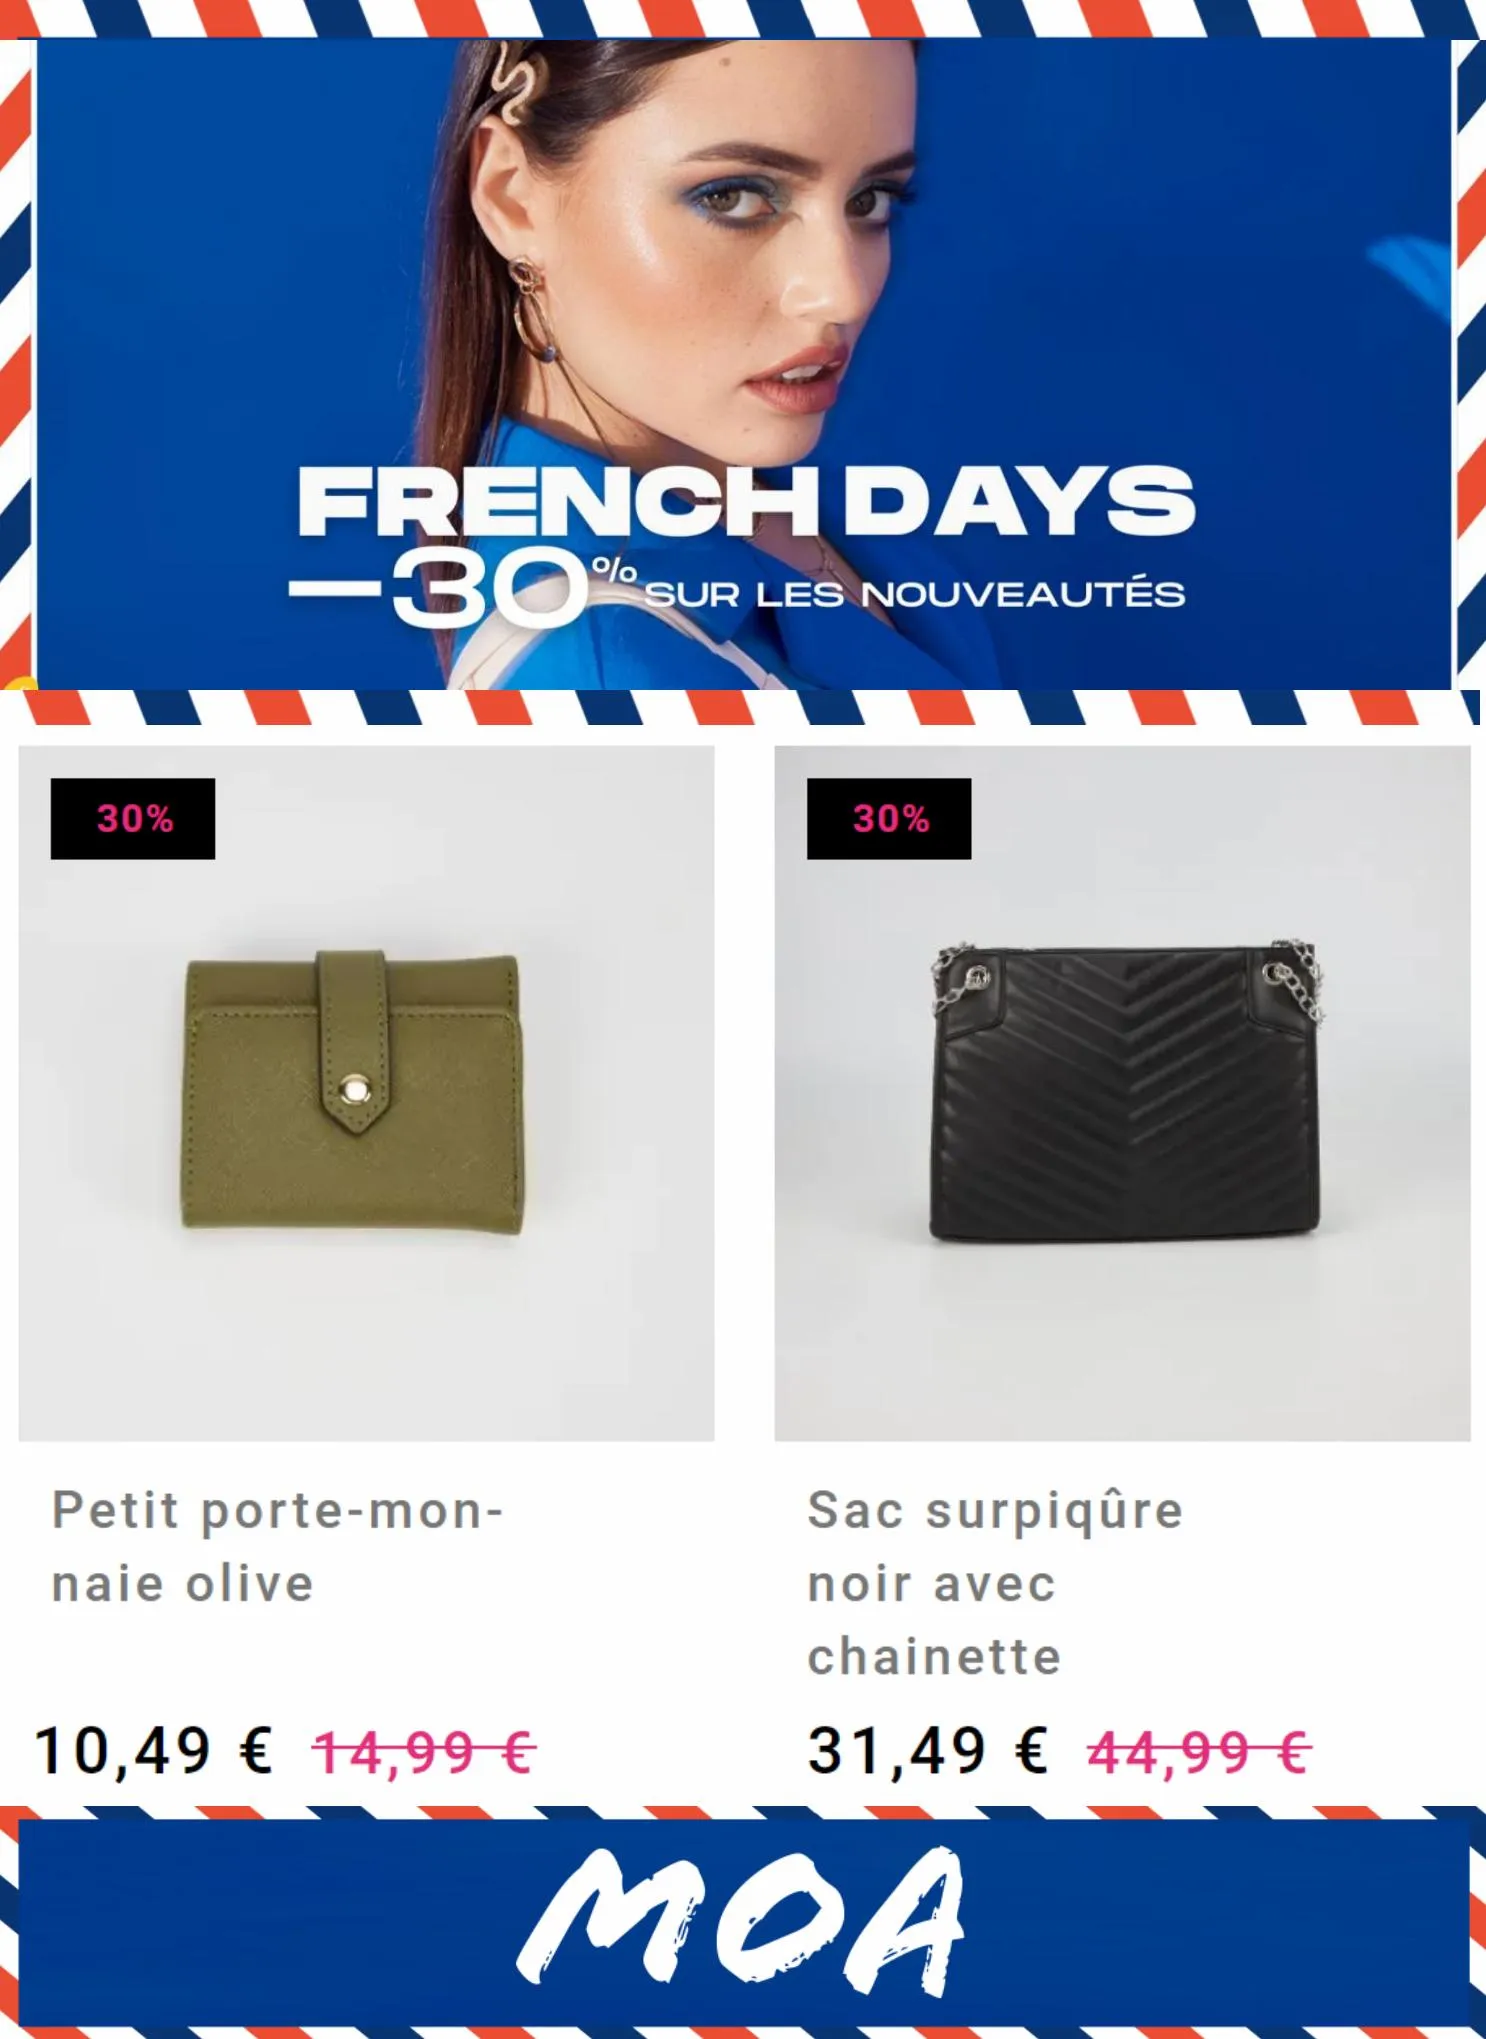 Catalogue French Days -30%*, page 00002